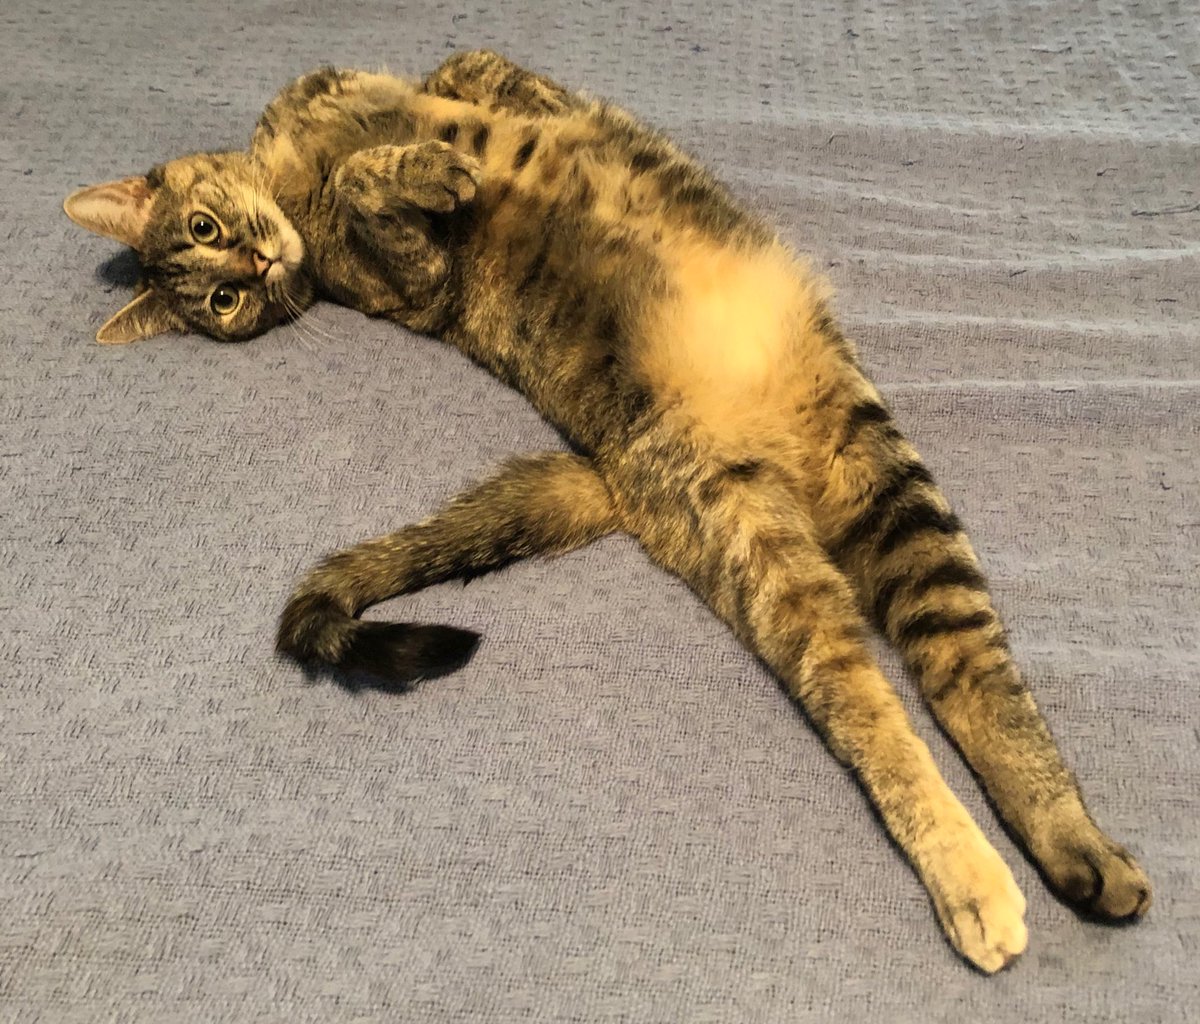 Sun is shining & I am doing my morning stretch! Happy #jellybellyfriday & #NationalHugYourCatDay & #NationalDonutDay 🍩 I hope something in your day makes you laugh & smile😹😻#CatsOfTwitter #cats #TabbyTroop #FridayVibes